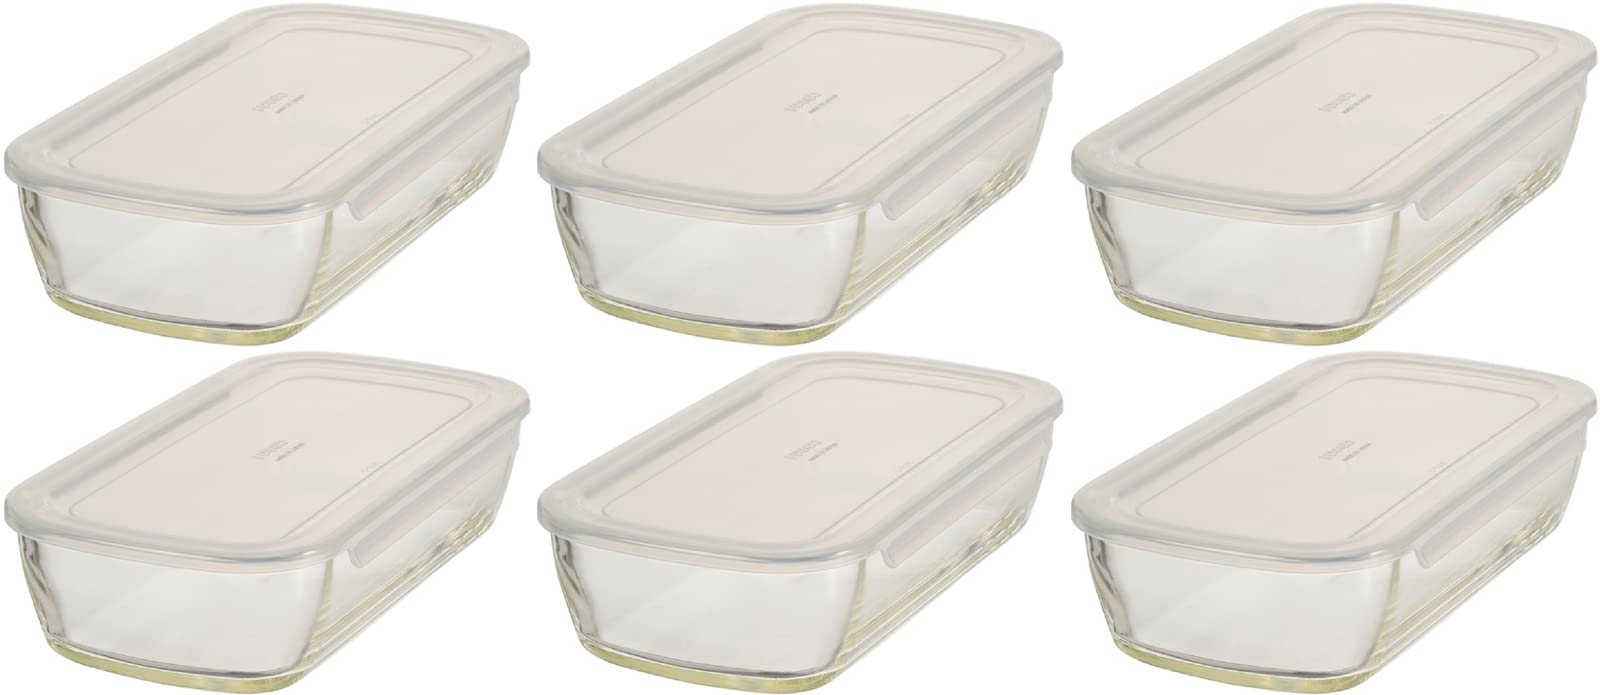 Hario Japan Buono Kitchen Kstl-90-Tw Glass Storage Containers (6-Pack) 900Ml Heat-Resistant Square Clear